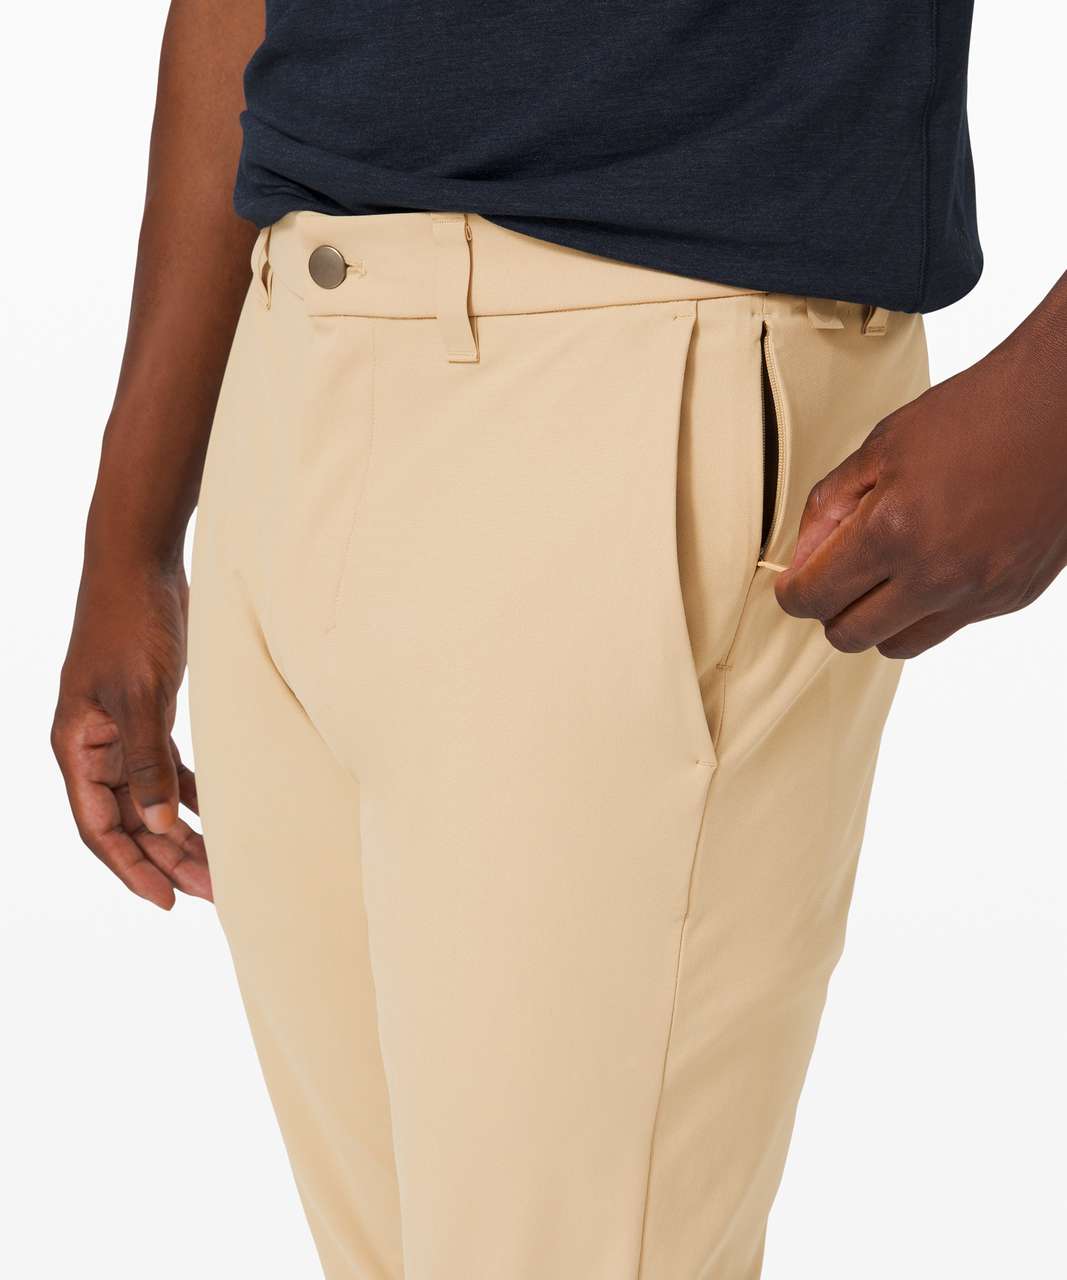 Lululemon Commission Pant Slim *Warpstreme 28" - Trench (First Release)